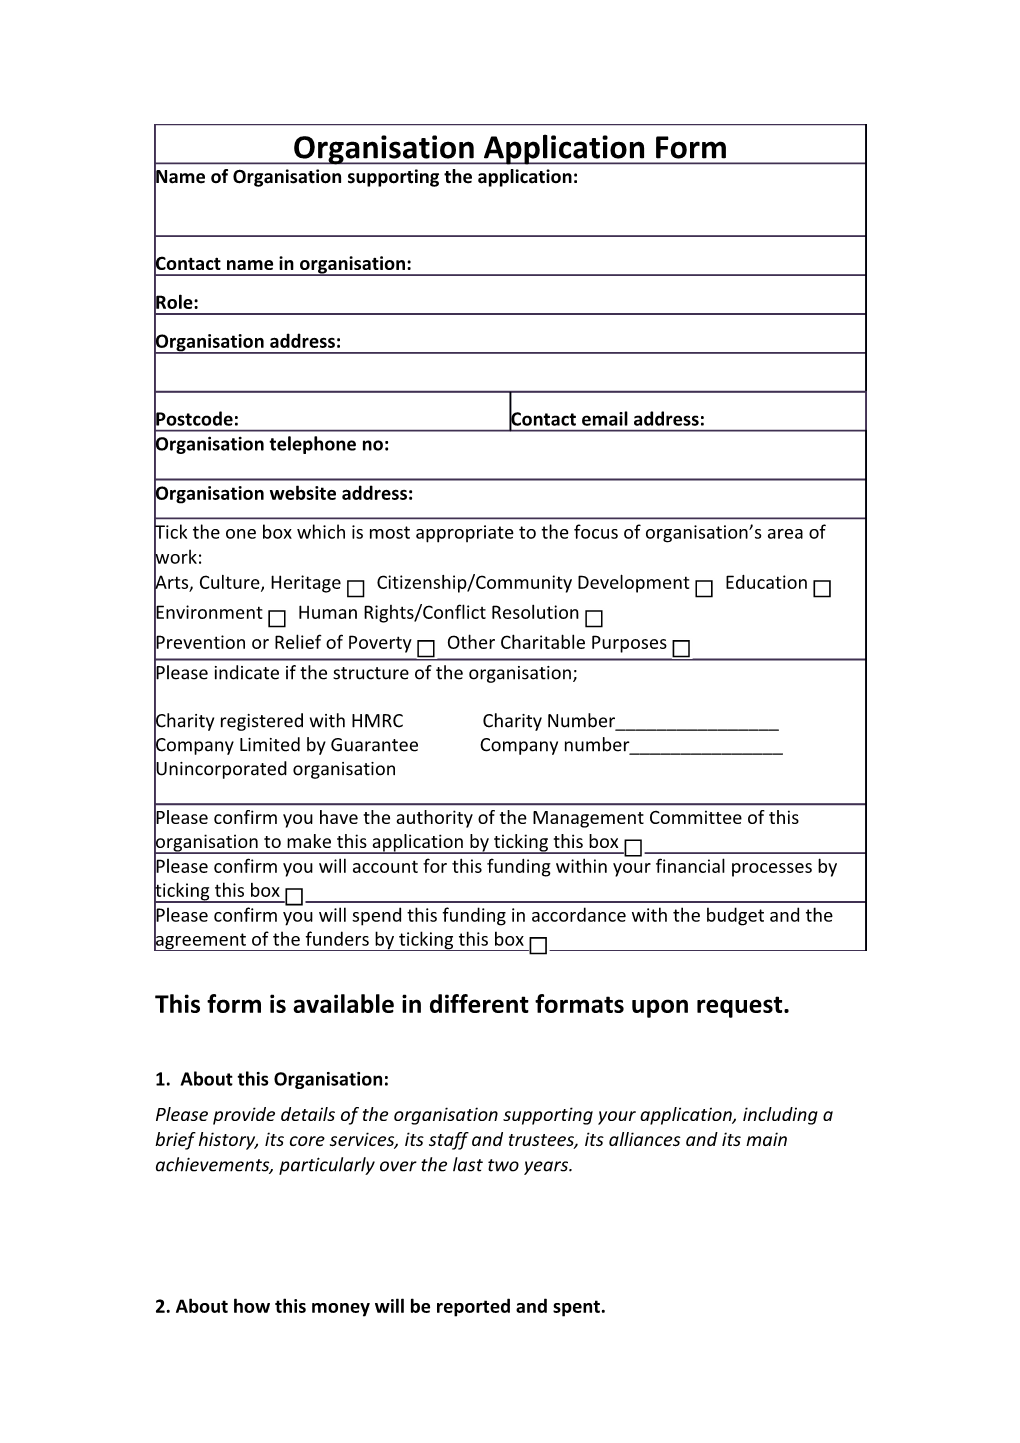 This Form Is Available in Different Formats Upon Request